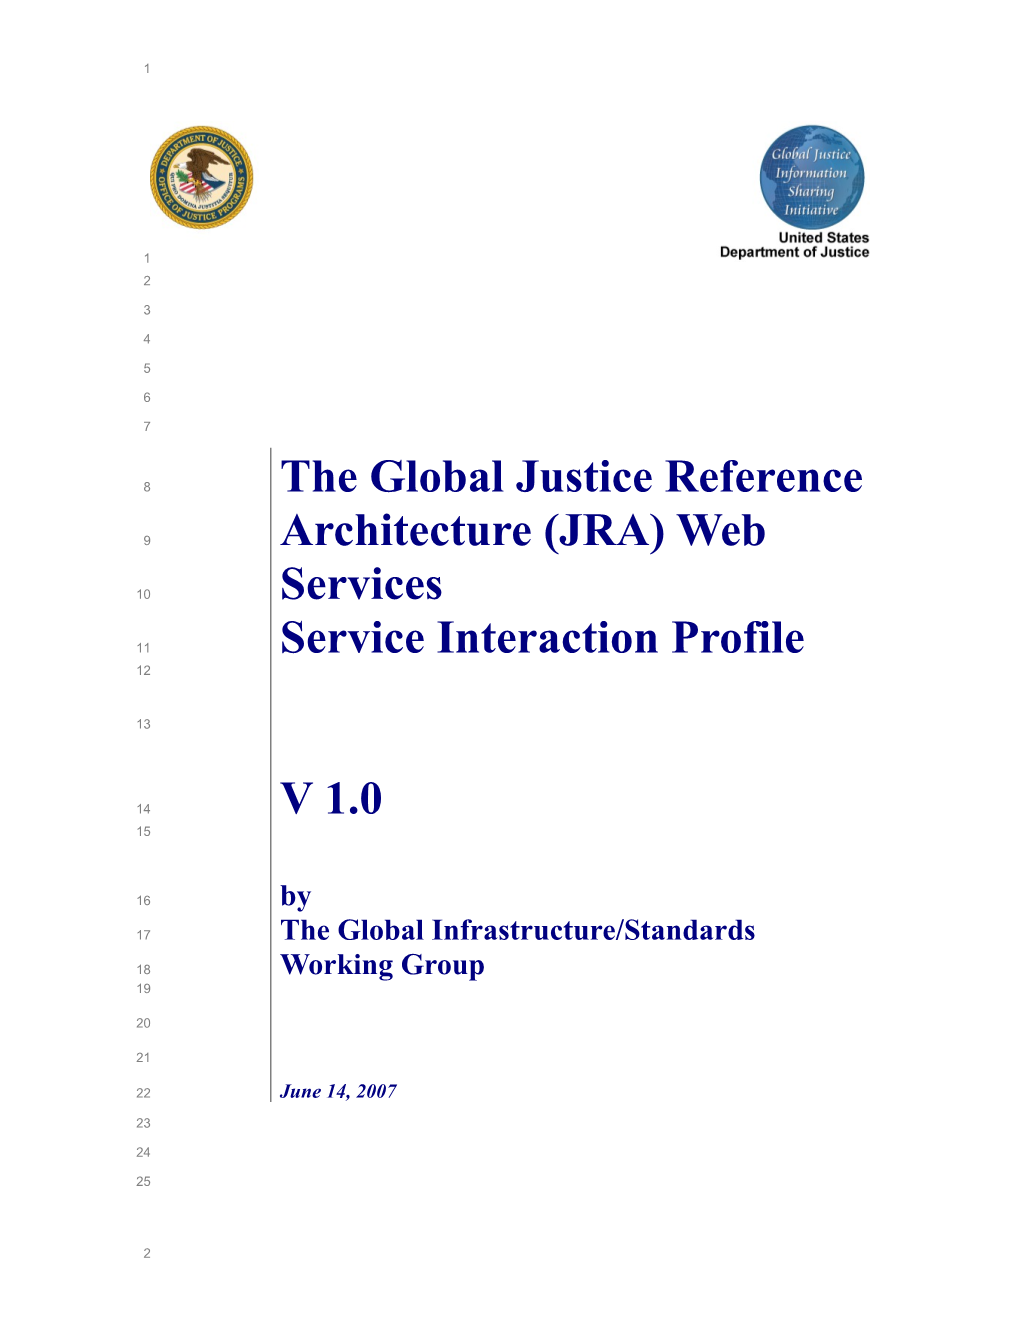 The Global Justice Reference Architecture (JRA)Web Services